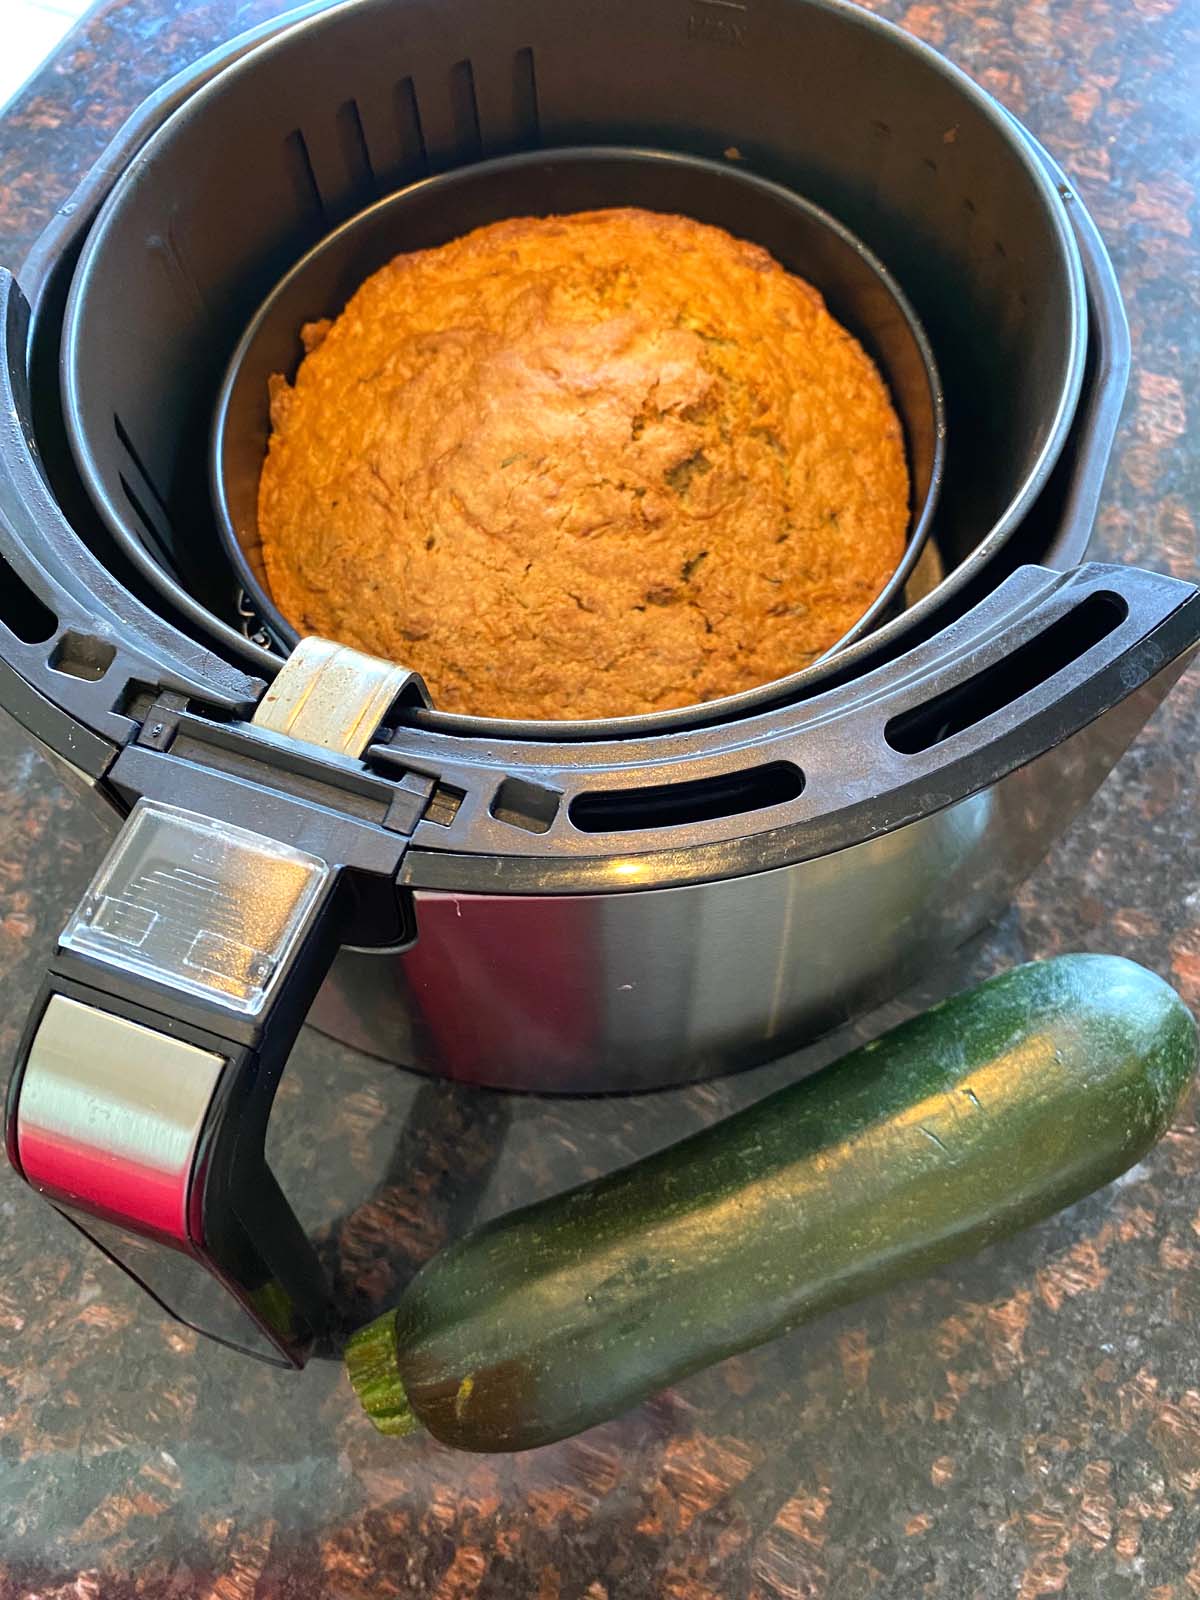 A freshly baked air fryer zucchini bread in the air fryer.